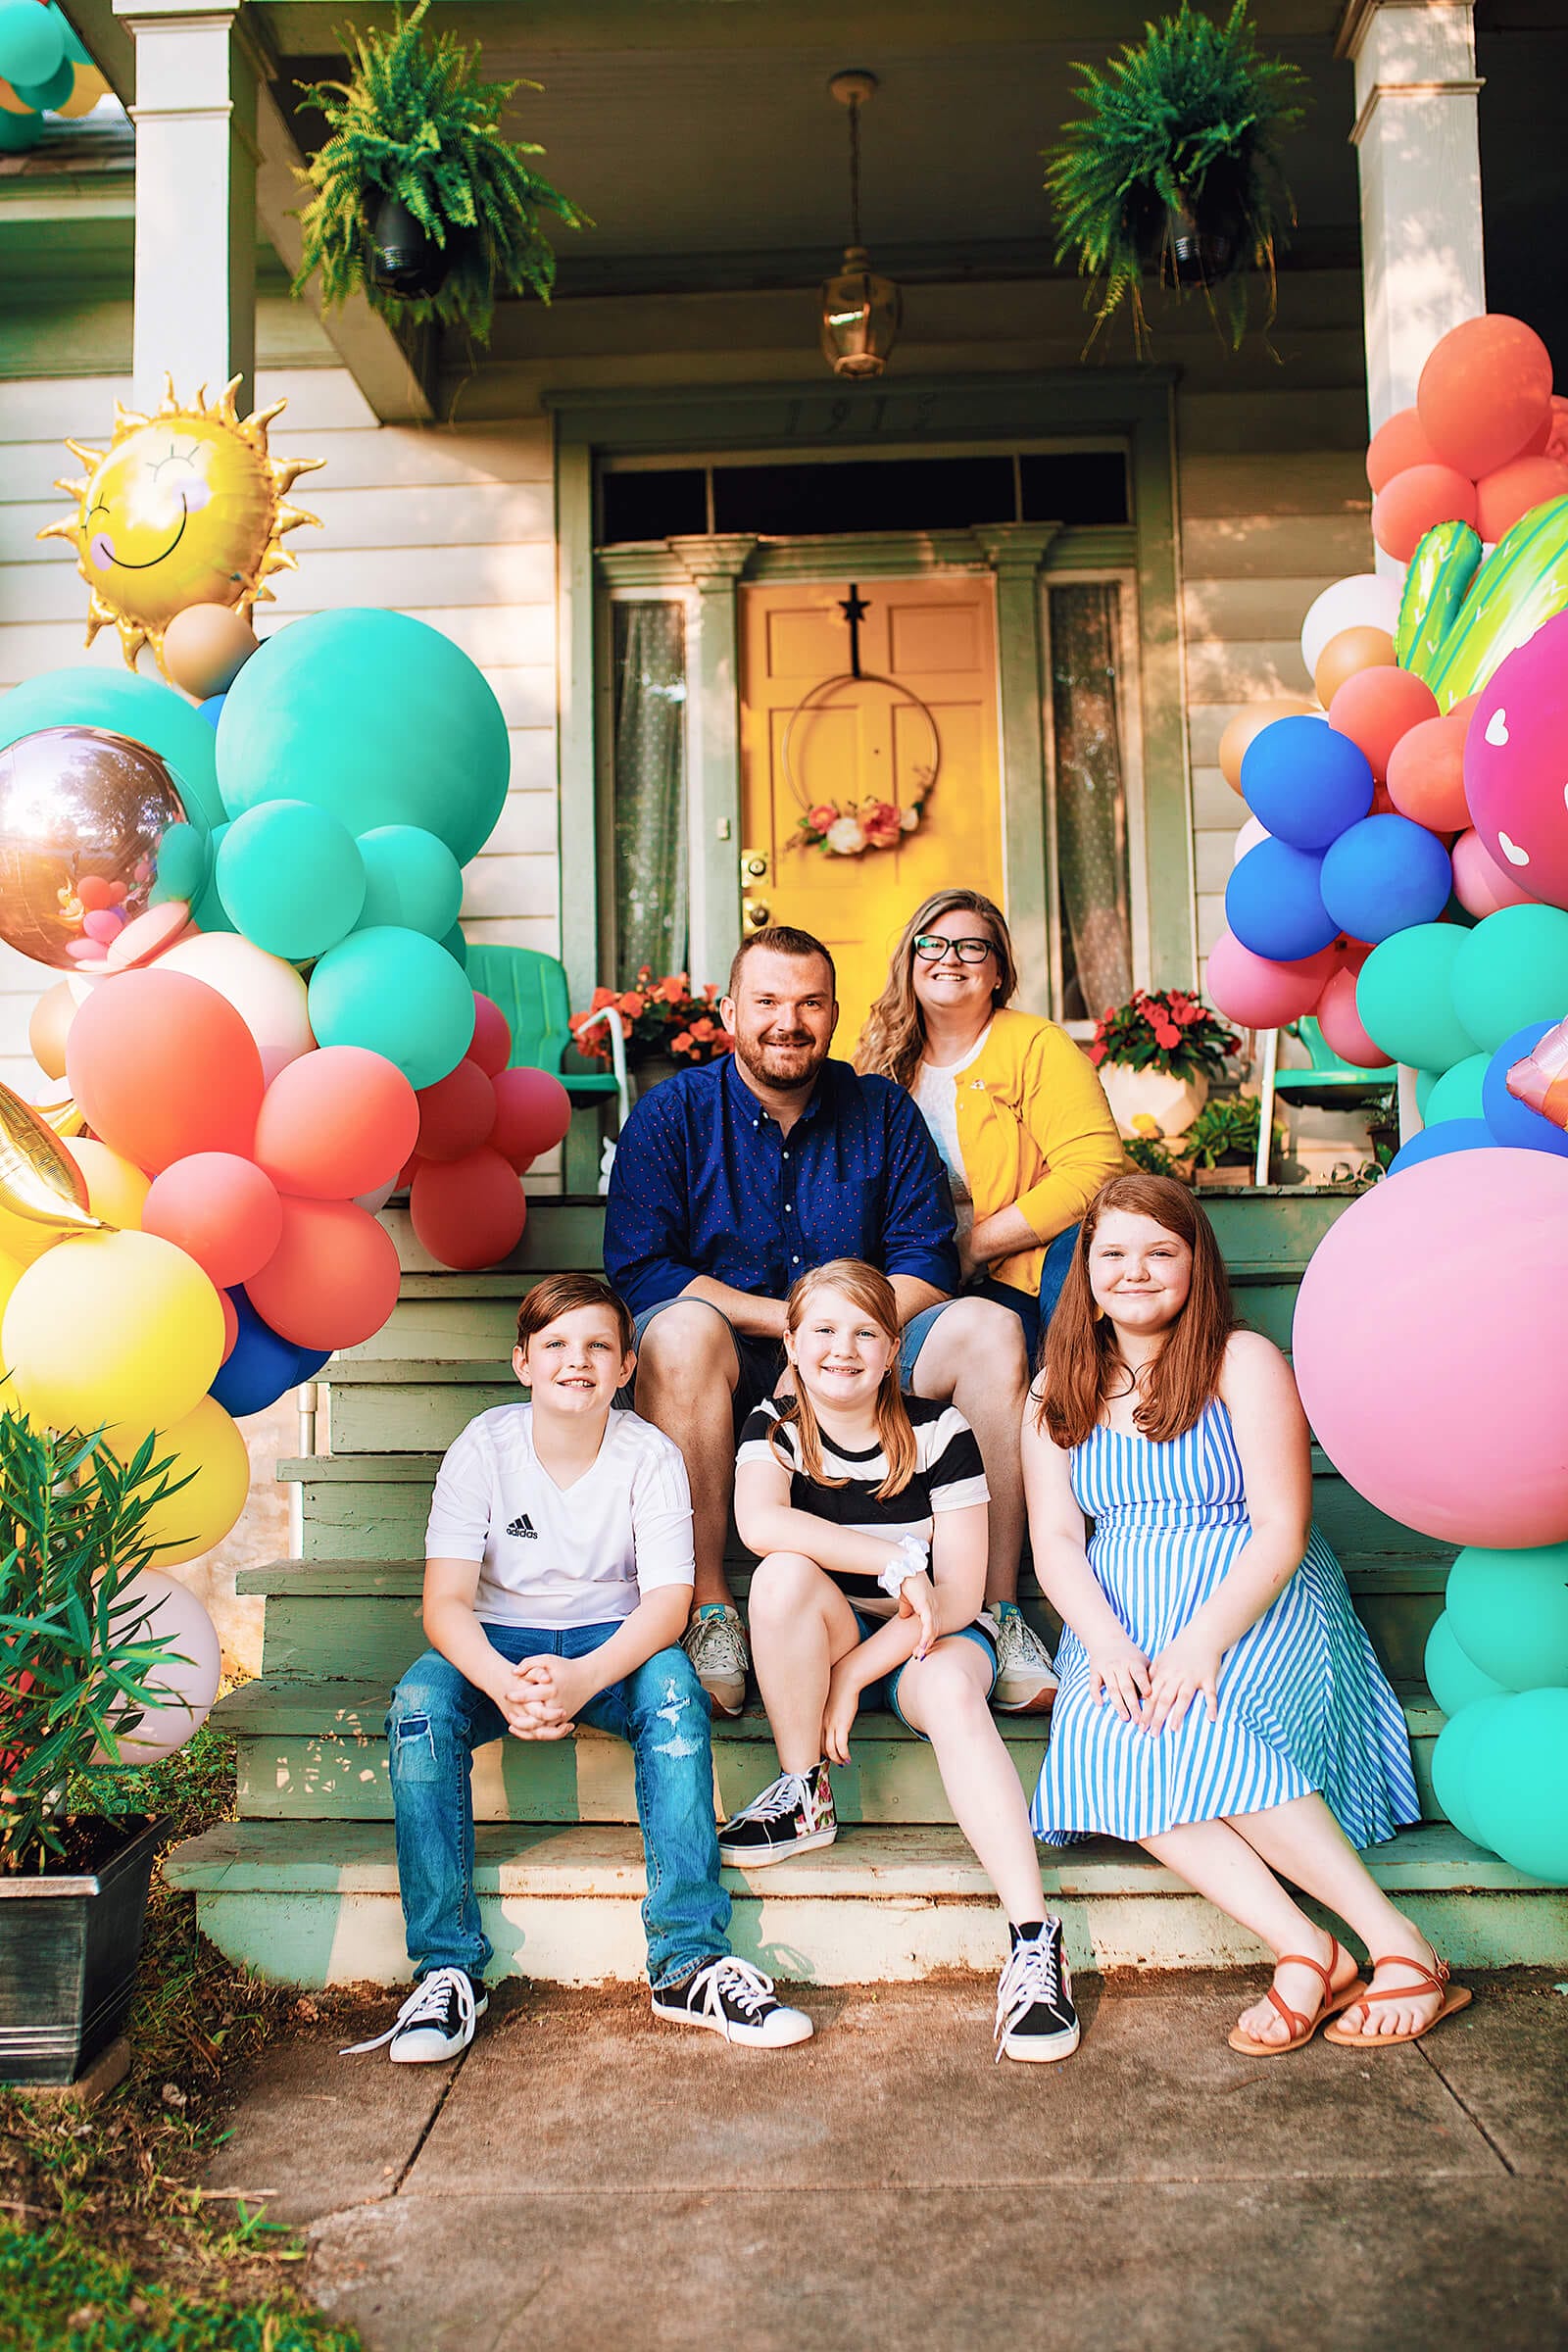 Christen Byrd, pictured here with her family, is the owner of Just Peachy, a balloon, event, and party decor shop in Little Rock, Arkansas.